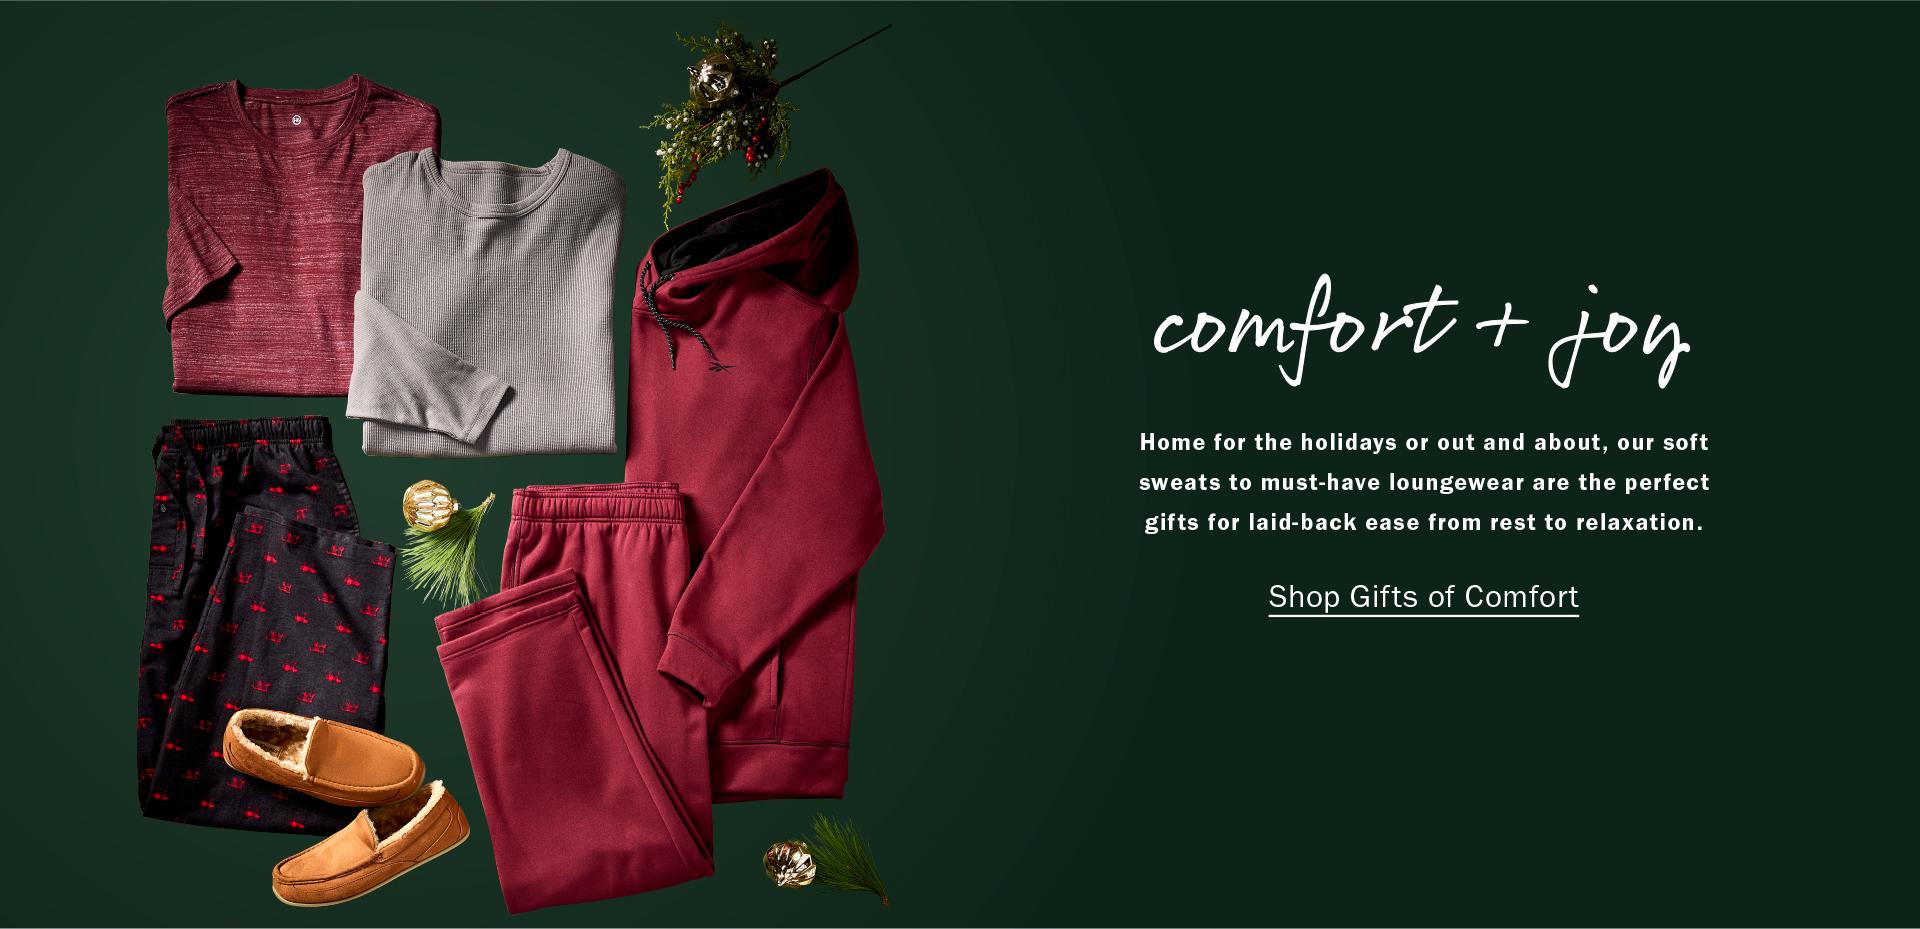 COMFORT + JOY | ROBES, SLIPPERS, LOUNGEWEAR + MORE YOUR BIG + TALL GUY WILL LOVE – AND MAY NEVER TAKE OFF. | SHOP GIFTS OF COMFORT